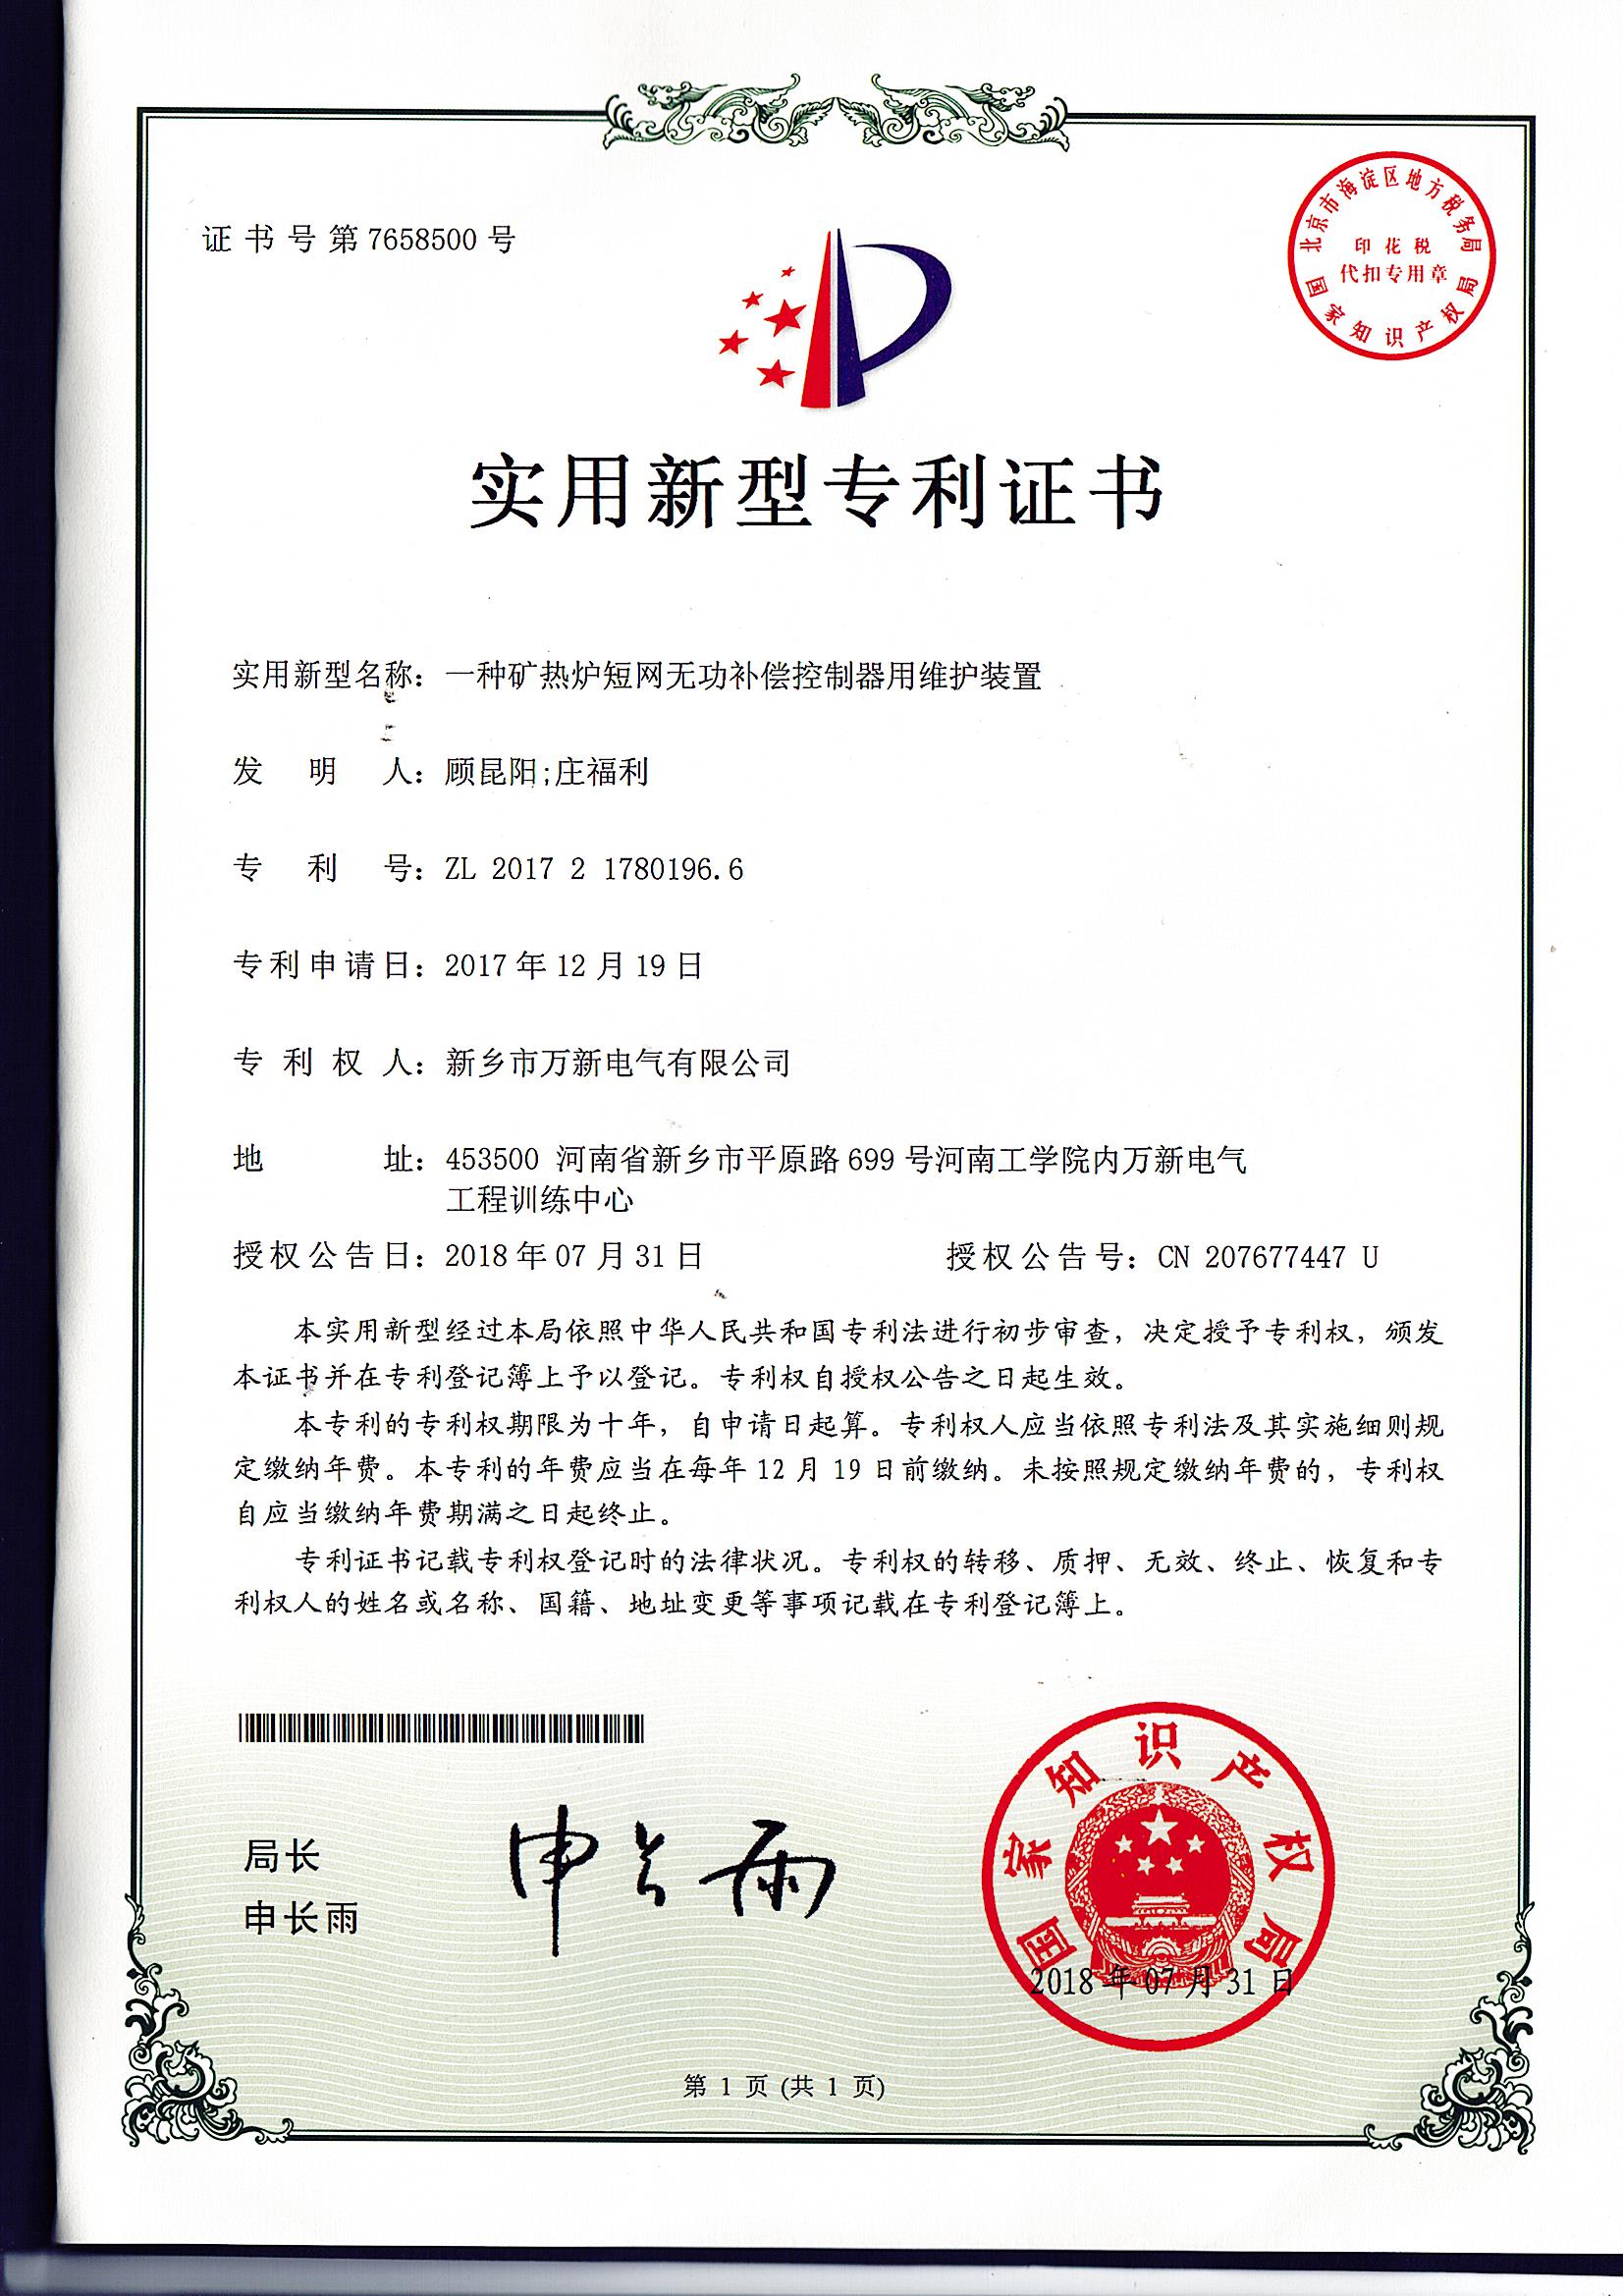 Wanxin product patent